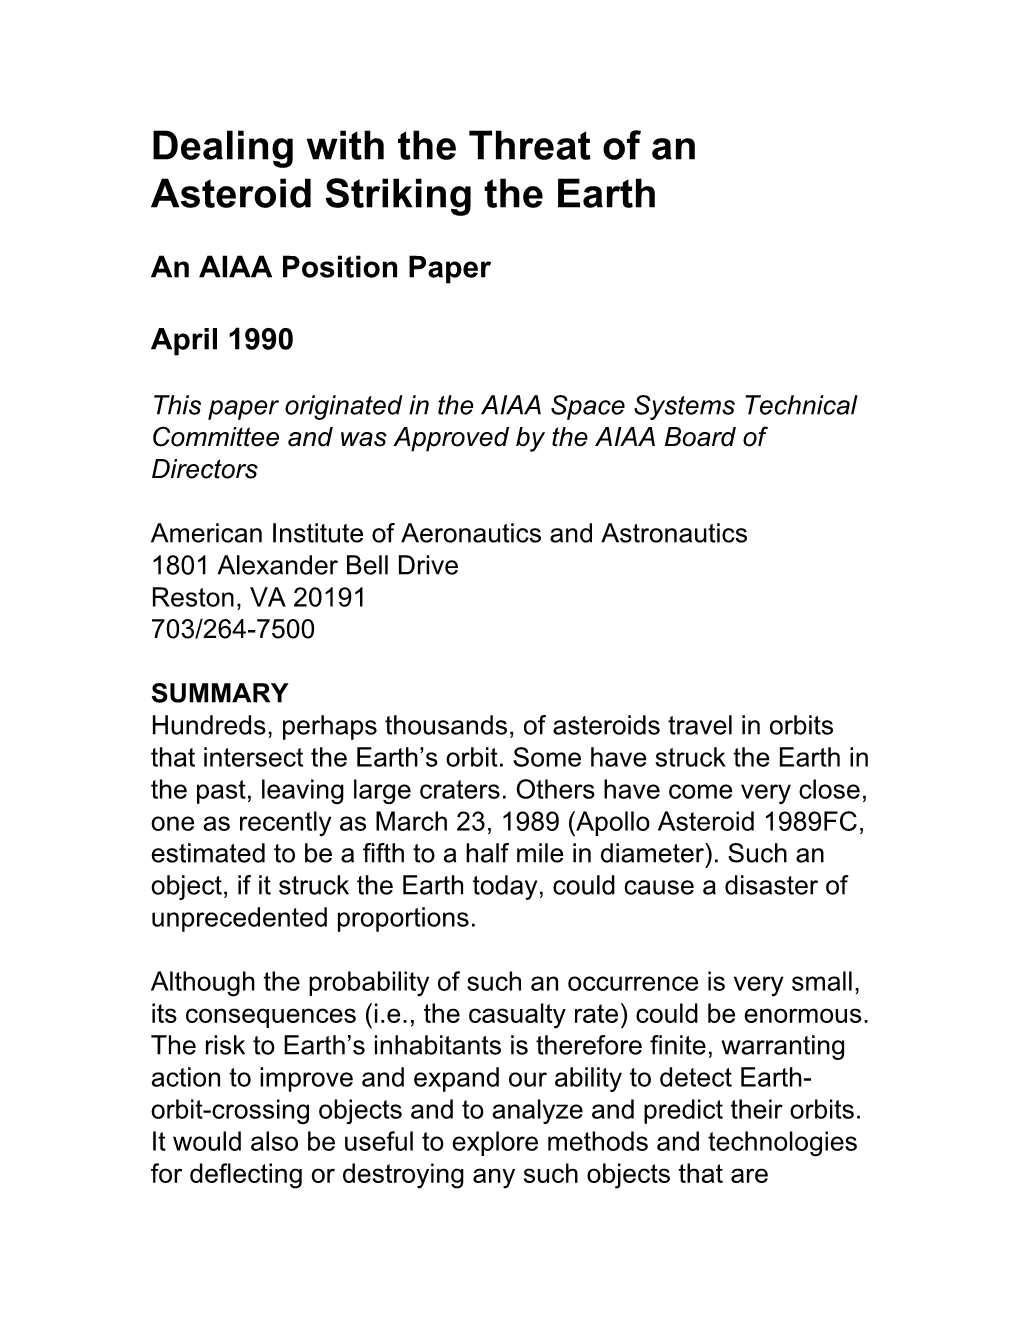 Dealing with the Threat of an Asteroid Striking the Earth